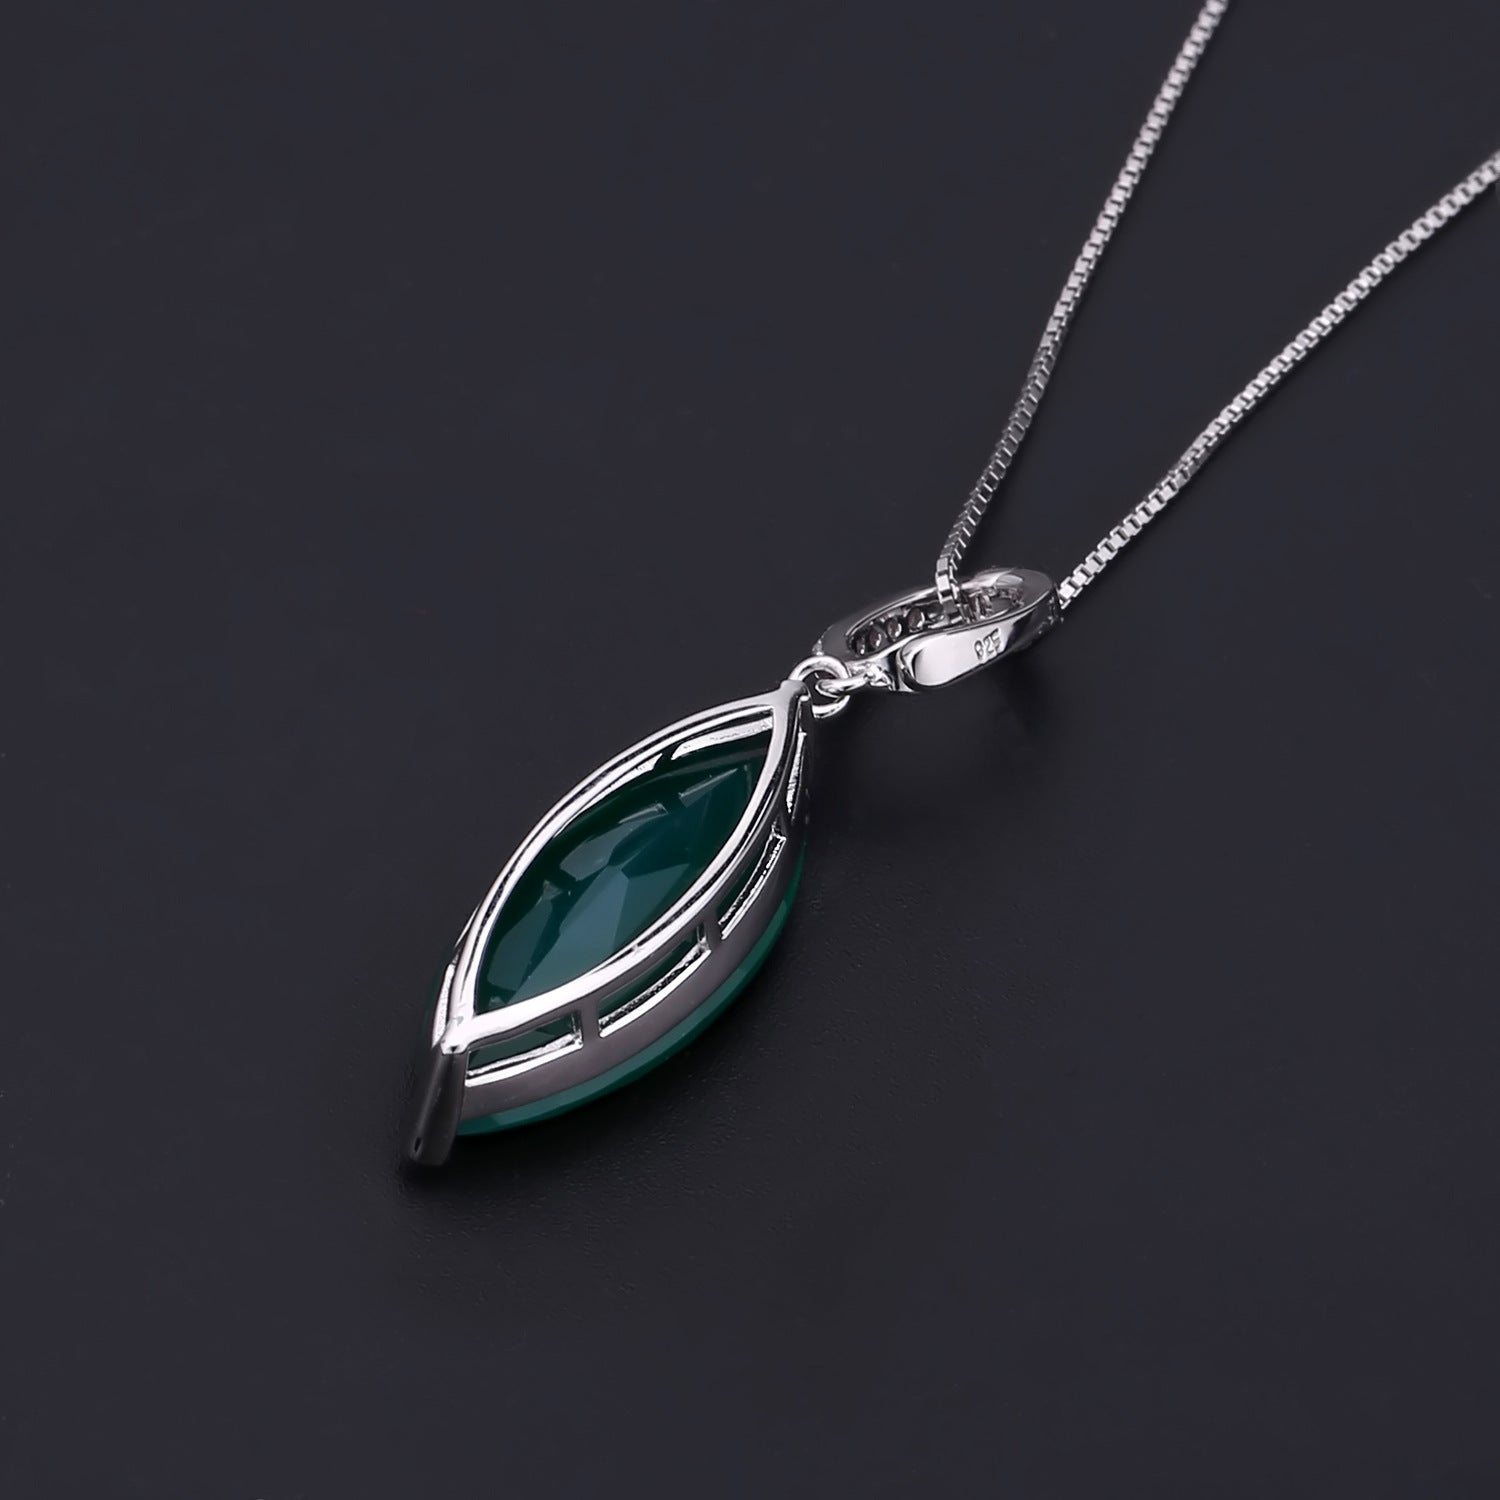 European Temperament Design Inlaid Green Agate Marquise Pendant Sterling Silver Necklace for Women